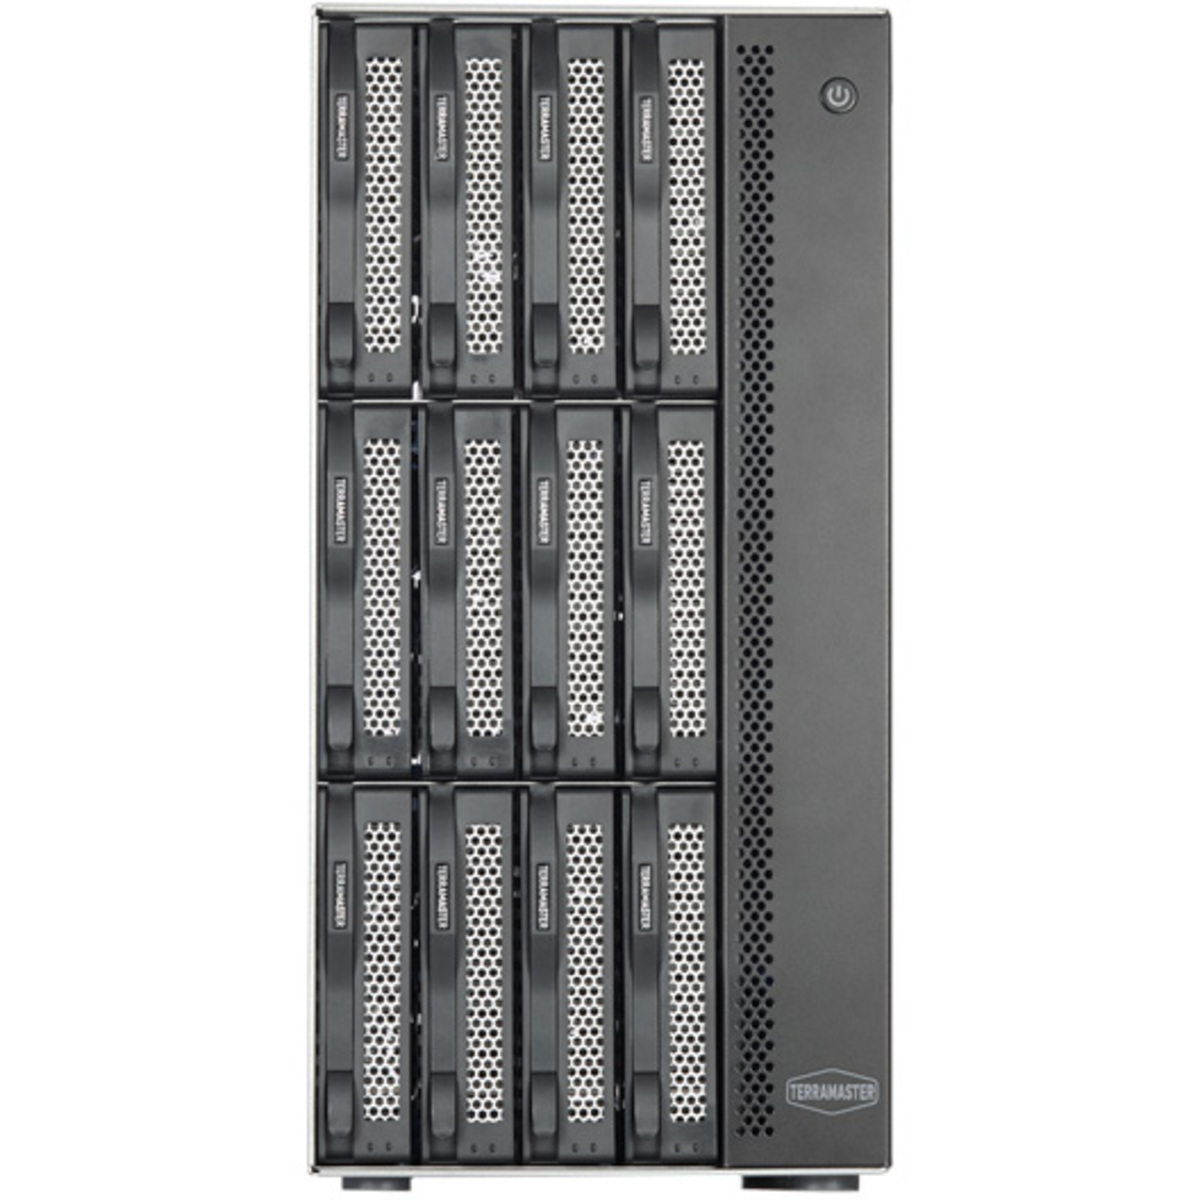 TerraMaster T12-423 18tb 12-Bay Desktop Multimedia / Power User / Business NAS - Network Attached Storage Device 9x2tb Sandisk Ultra 3D SDSSDH3-2T00 2.5 560/520MB/s SATA 6Gb/s SSD CONSUMER Class Drives Installed - Burn-In Tested T12-423